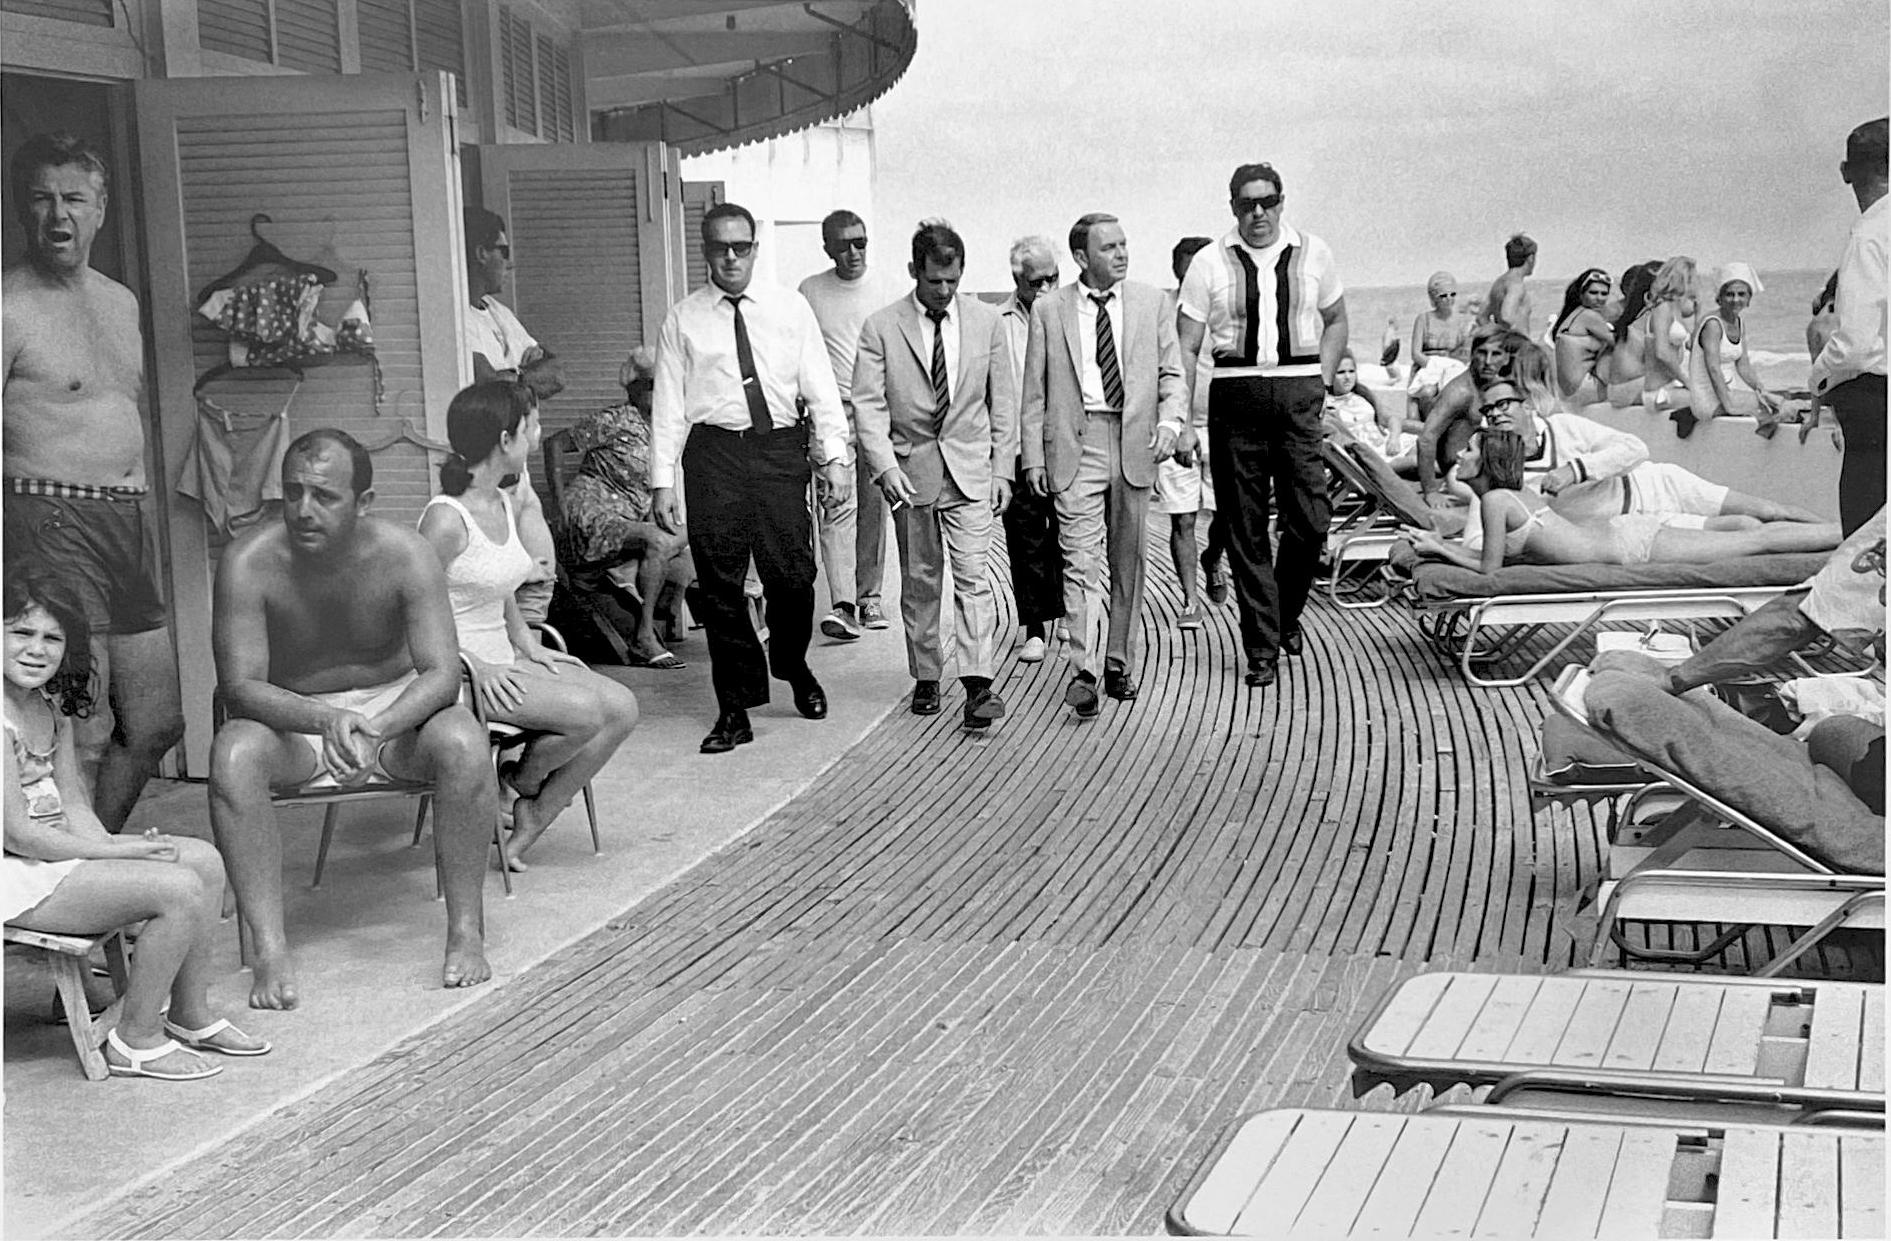 Terry O'Neill Black and White Photograph - Frank Sinatra on the Boardwalk, View 2 (24" x 34")